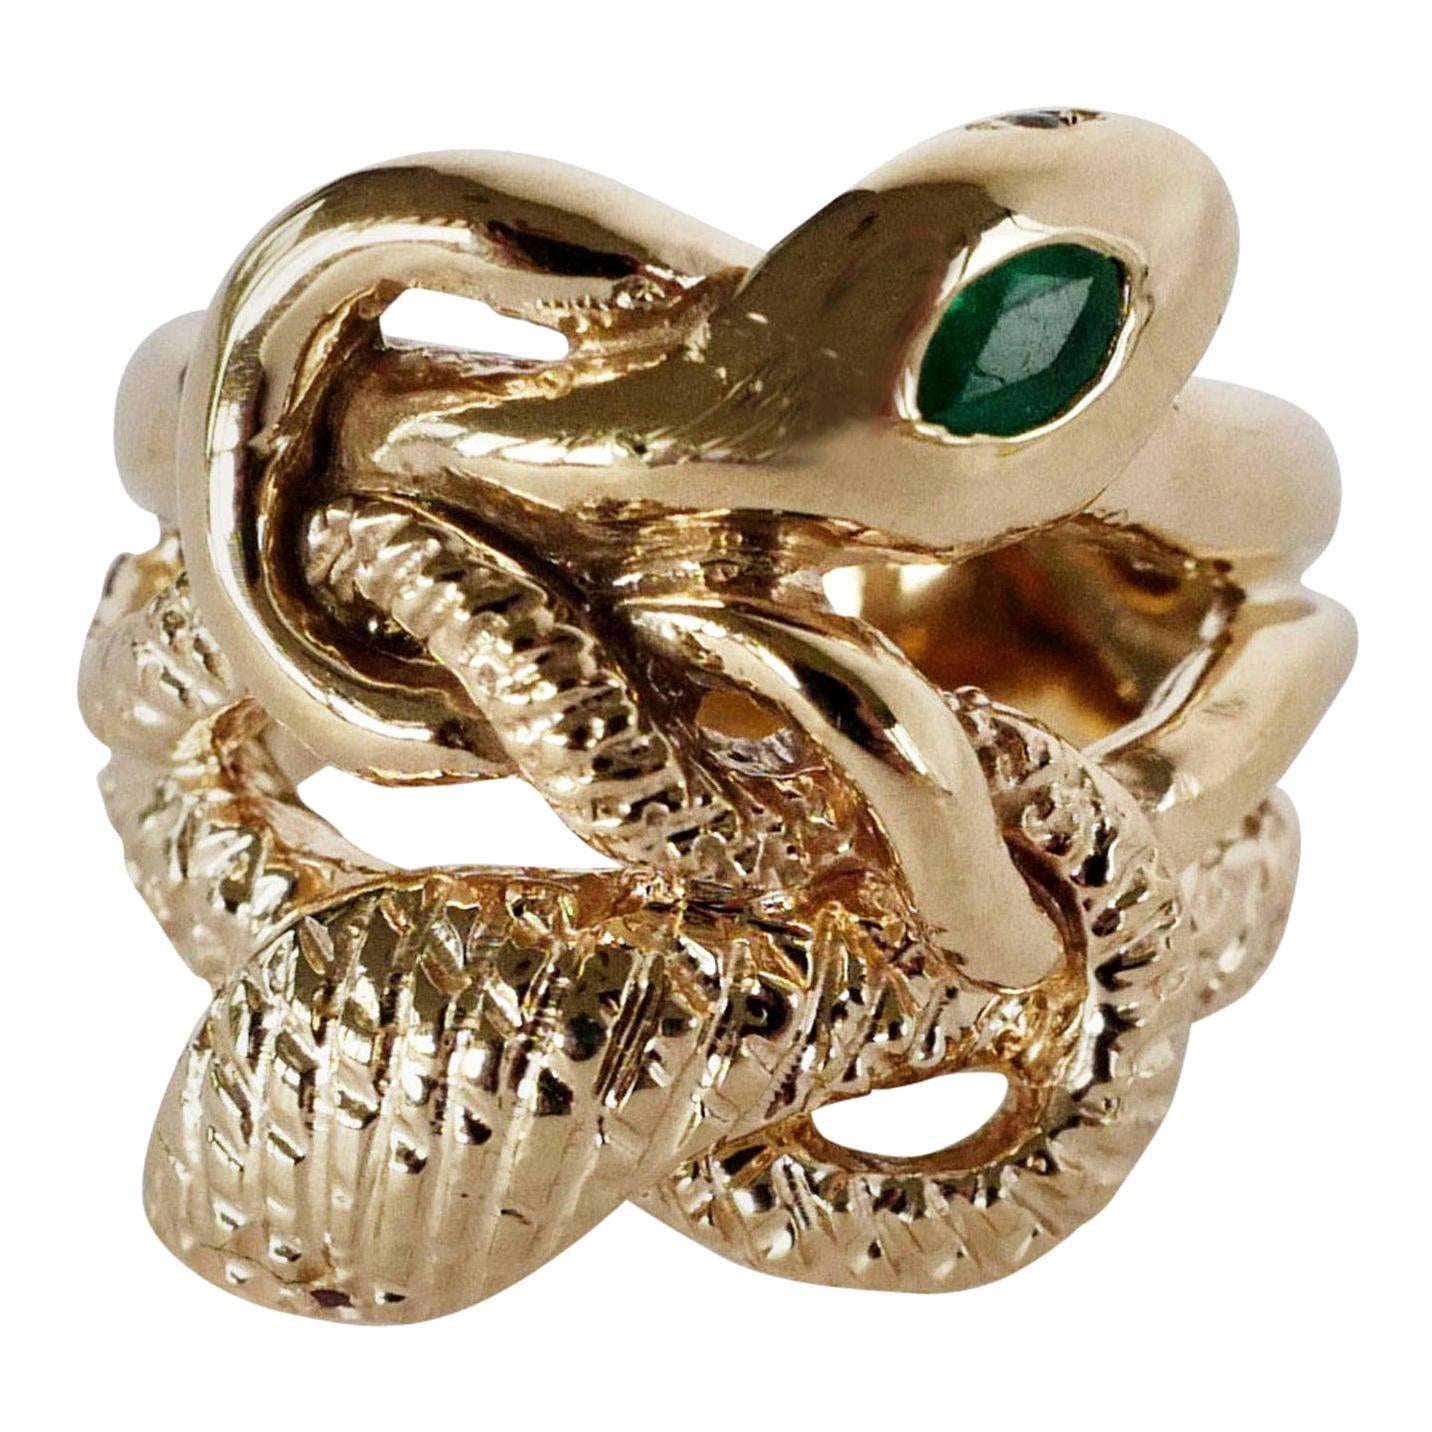 Emerald White Diamond Snake Ring Ruby Eyes Bronze Victorian Style J Dauphin For Sale